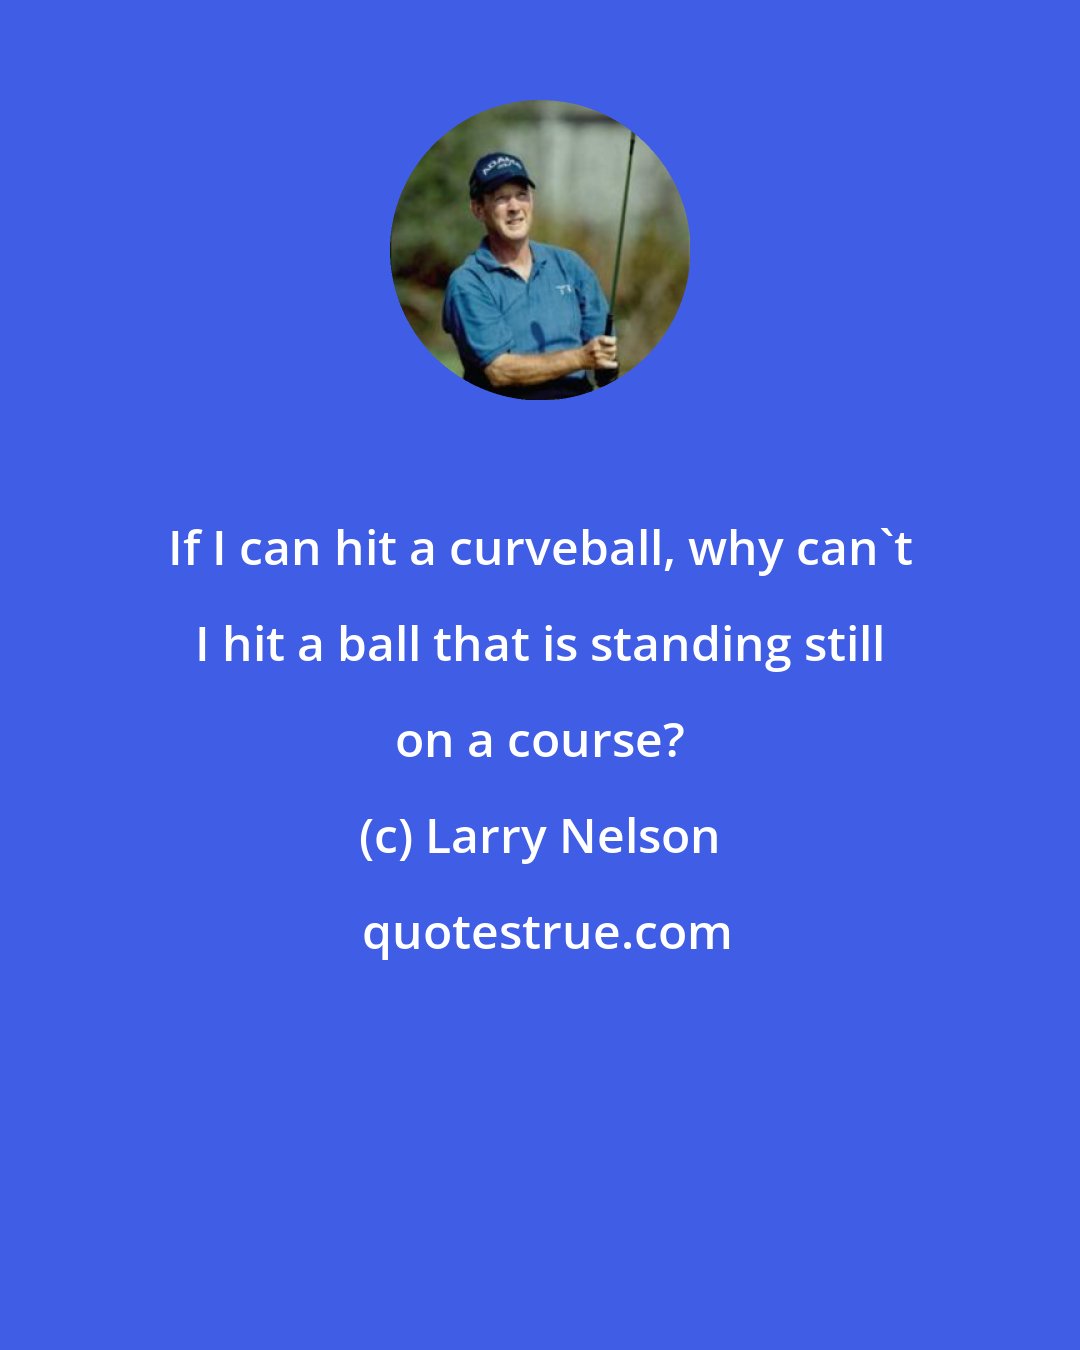 Larry Nelson: If I can hit a curveball, why can't I hit a ball that is standing still on a course?